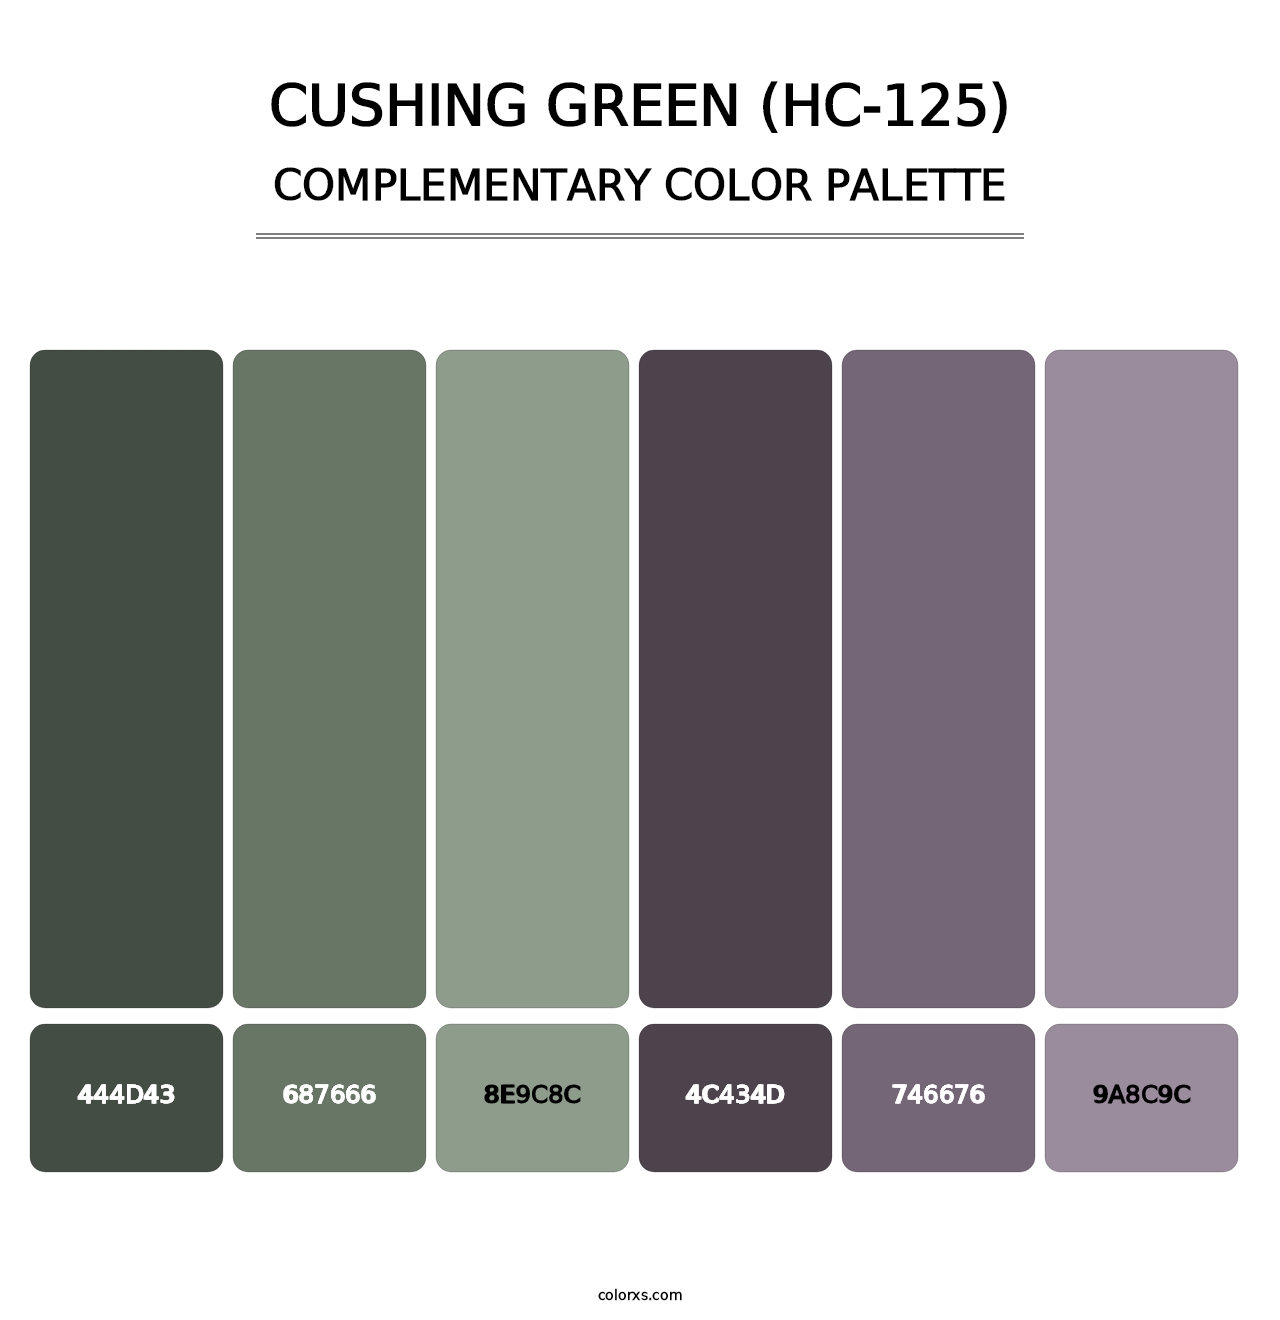 Cushing Green (HC-125) - Complementary Color Palette